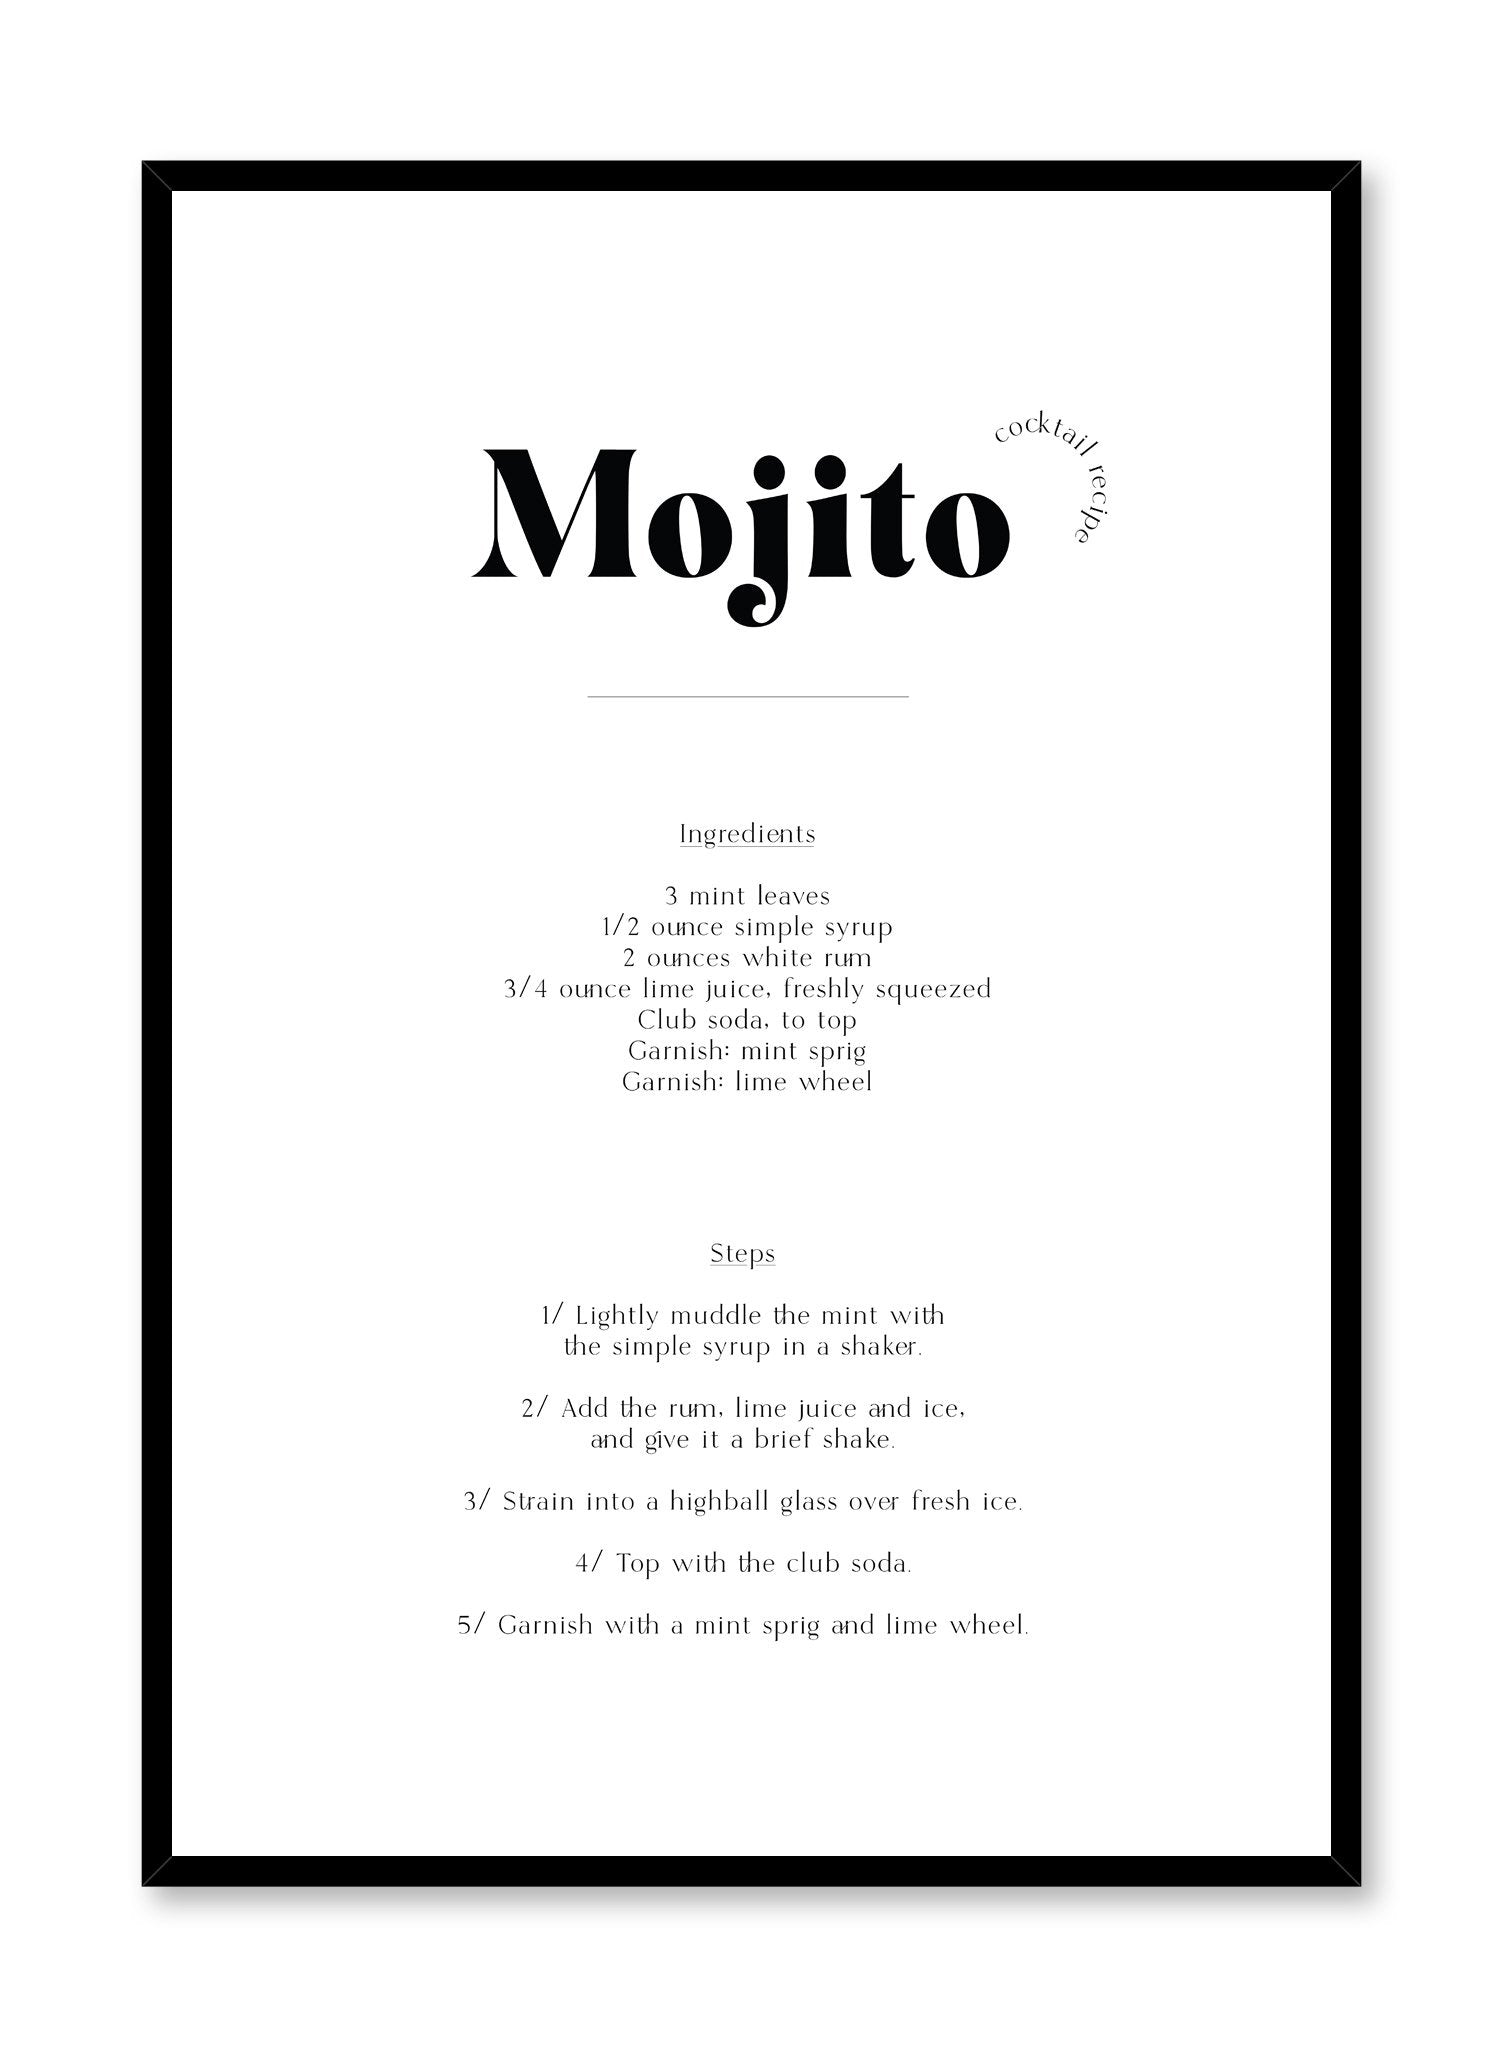 Mojito is a cocktail recipe typography poster by Opposite Wall.